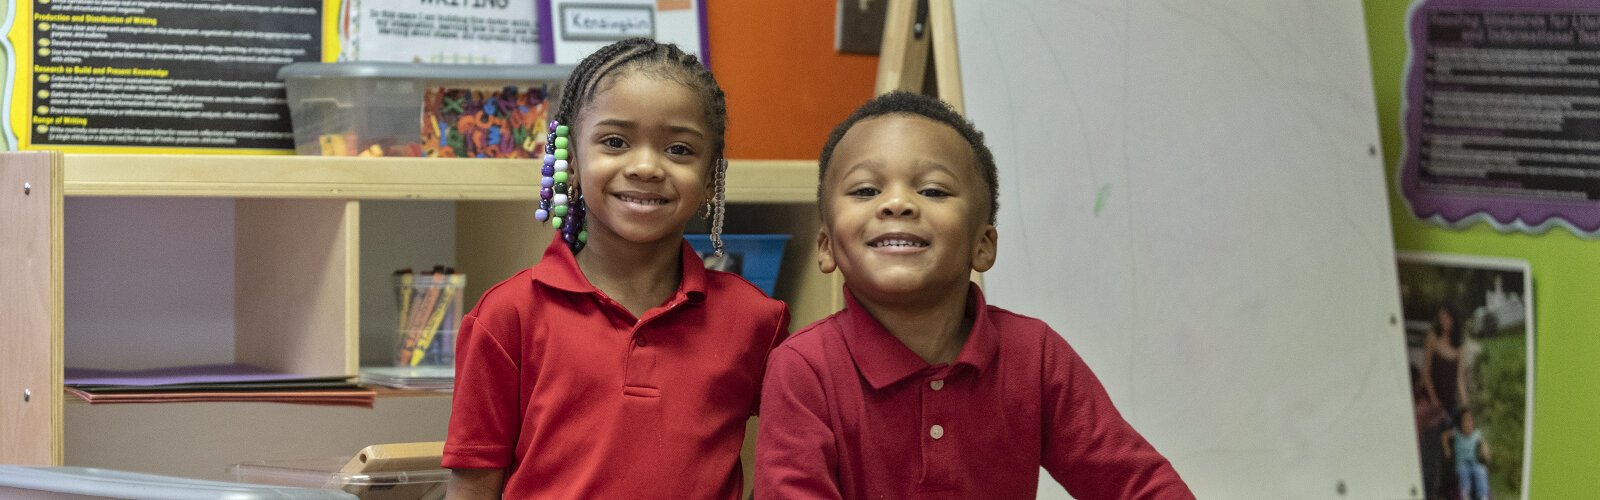 TOTally Kids Learning Center in Western Hills received a five-star Step Up to Quality Rating from the state thanks, in part, to money from Cincinnati Preschool Promise.